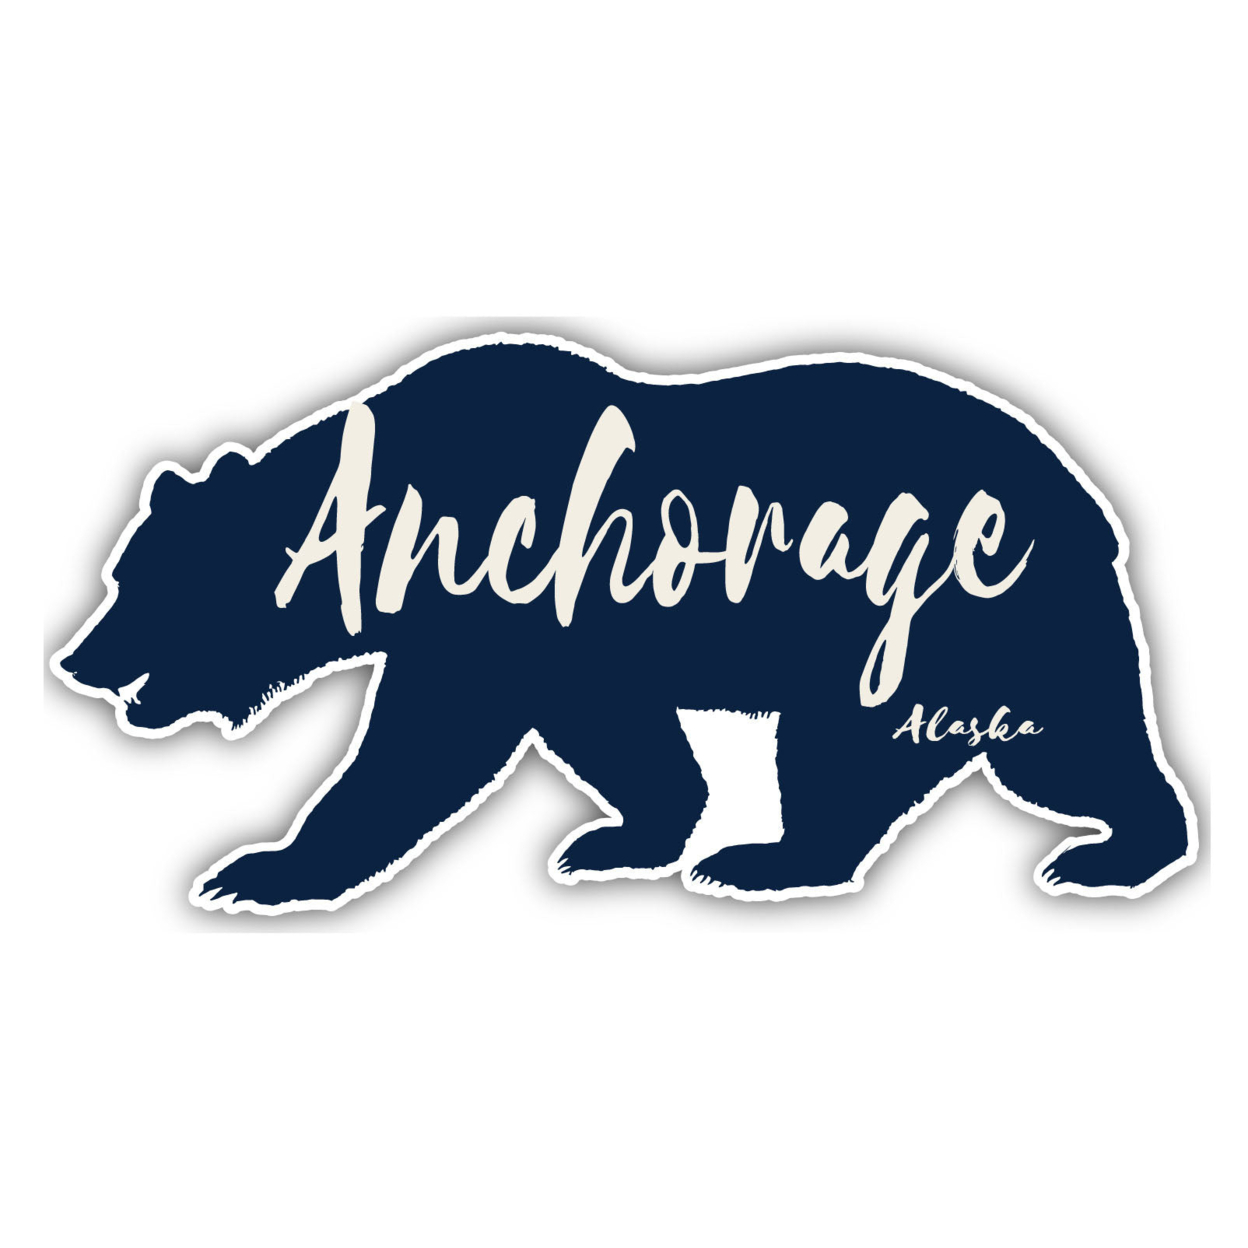 Anchorage Alaska Souvenir Decorative Stickers (Choose Theme And Size) - 4-Pack, 2-Inch, Great Outdoors